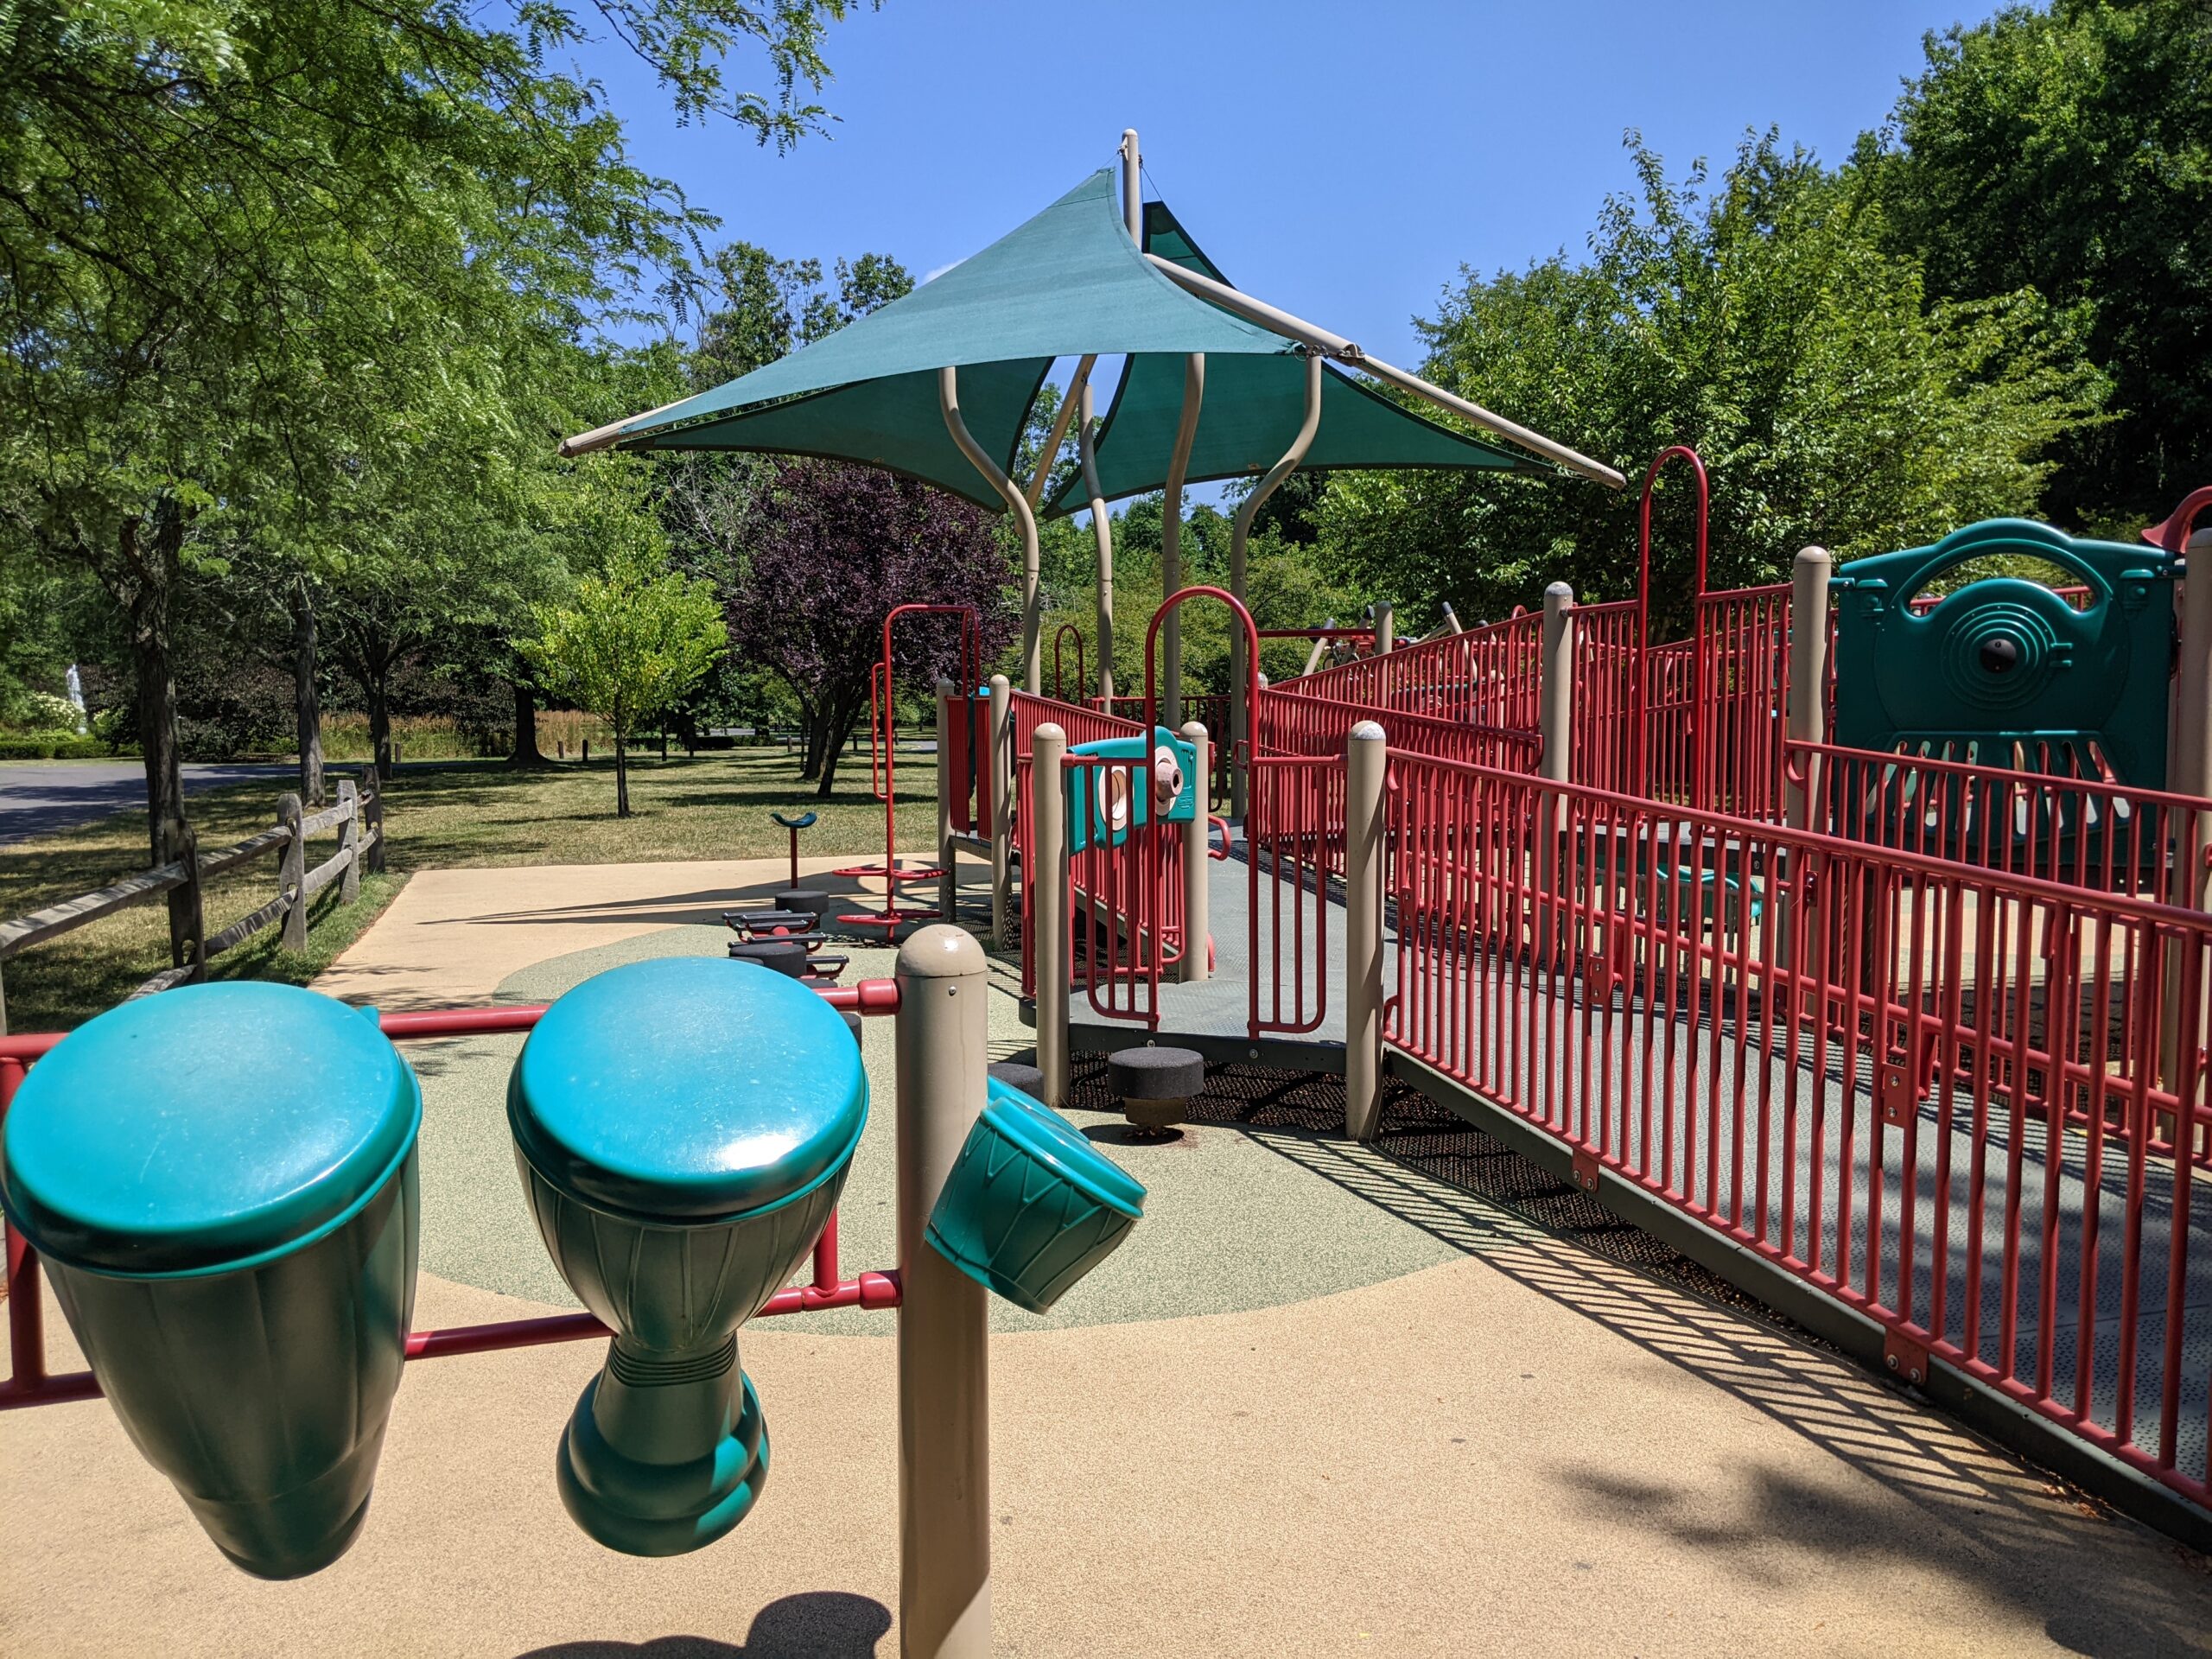 Children's Park Playground at Veteran's Park in Hamilton Township NJ - Accessible - ramp and path with Drums WIDE image